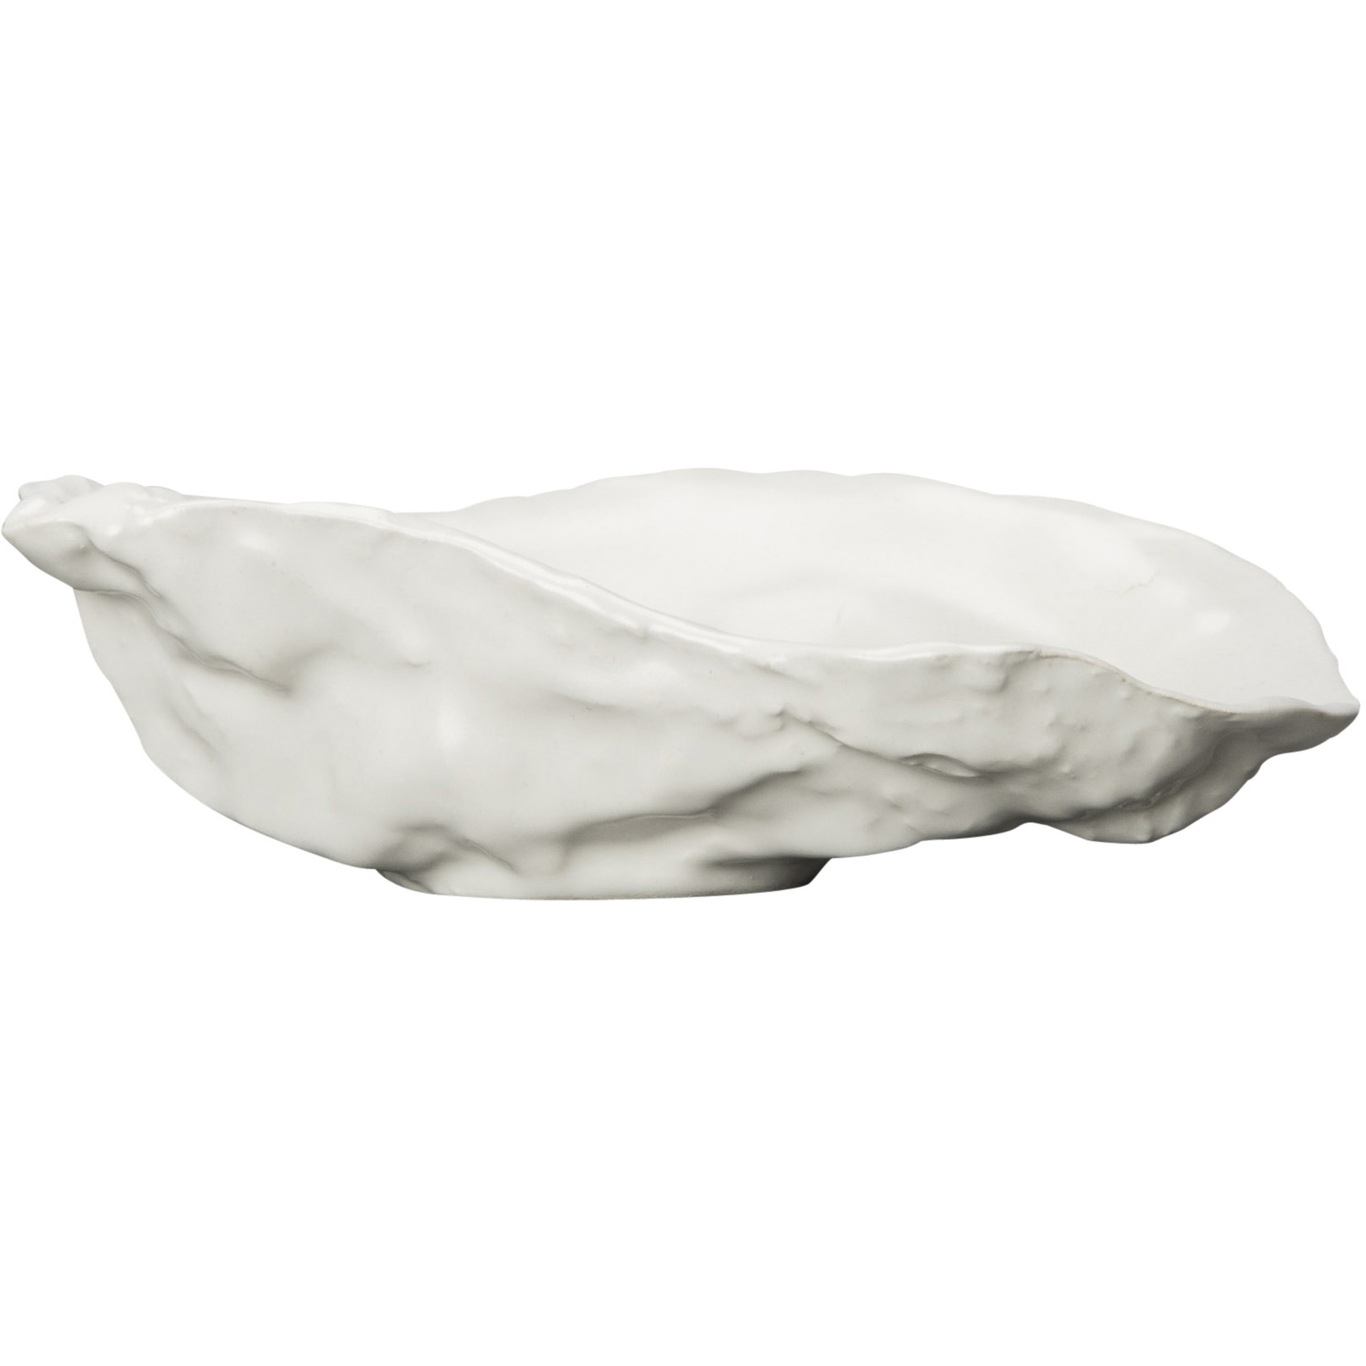 Oyster Plate 13x8 cm, White